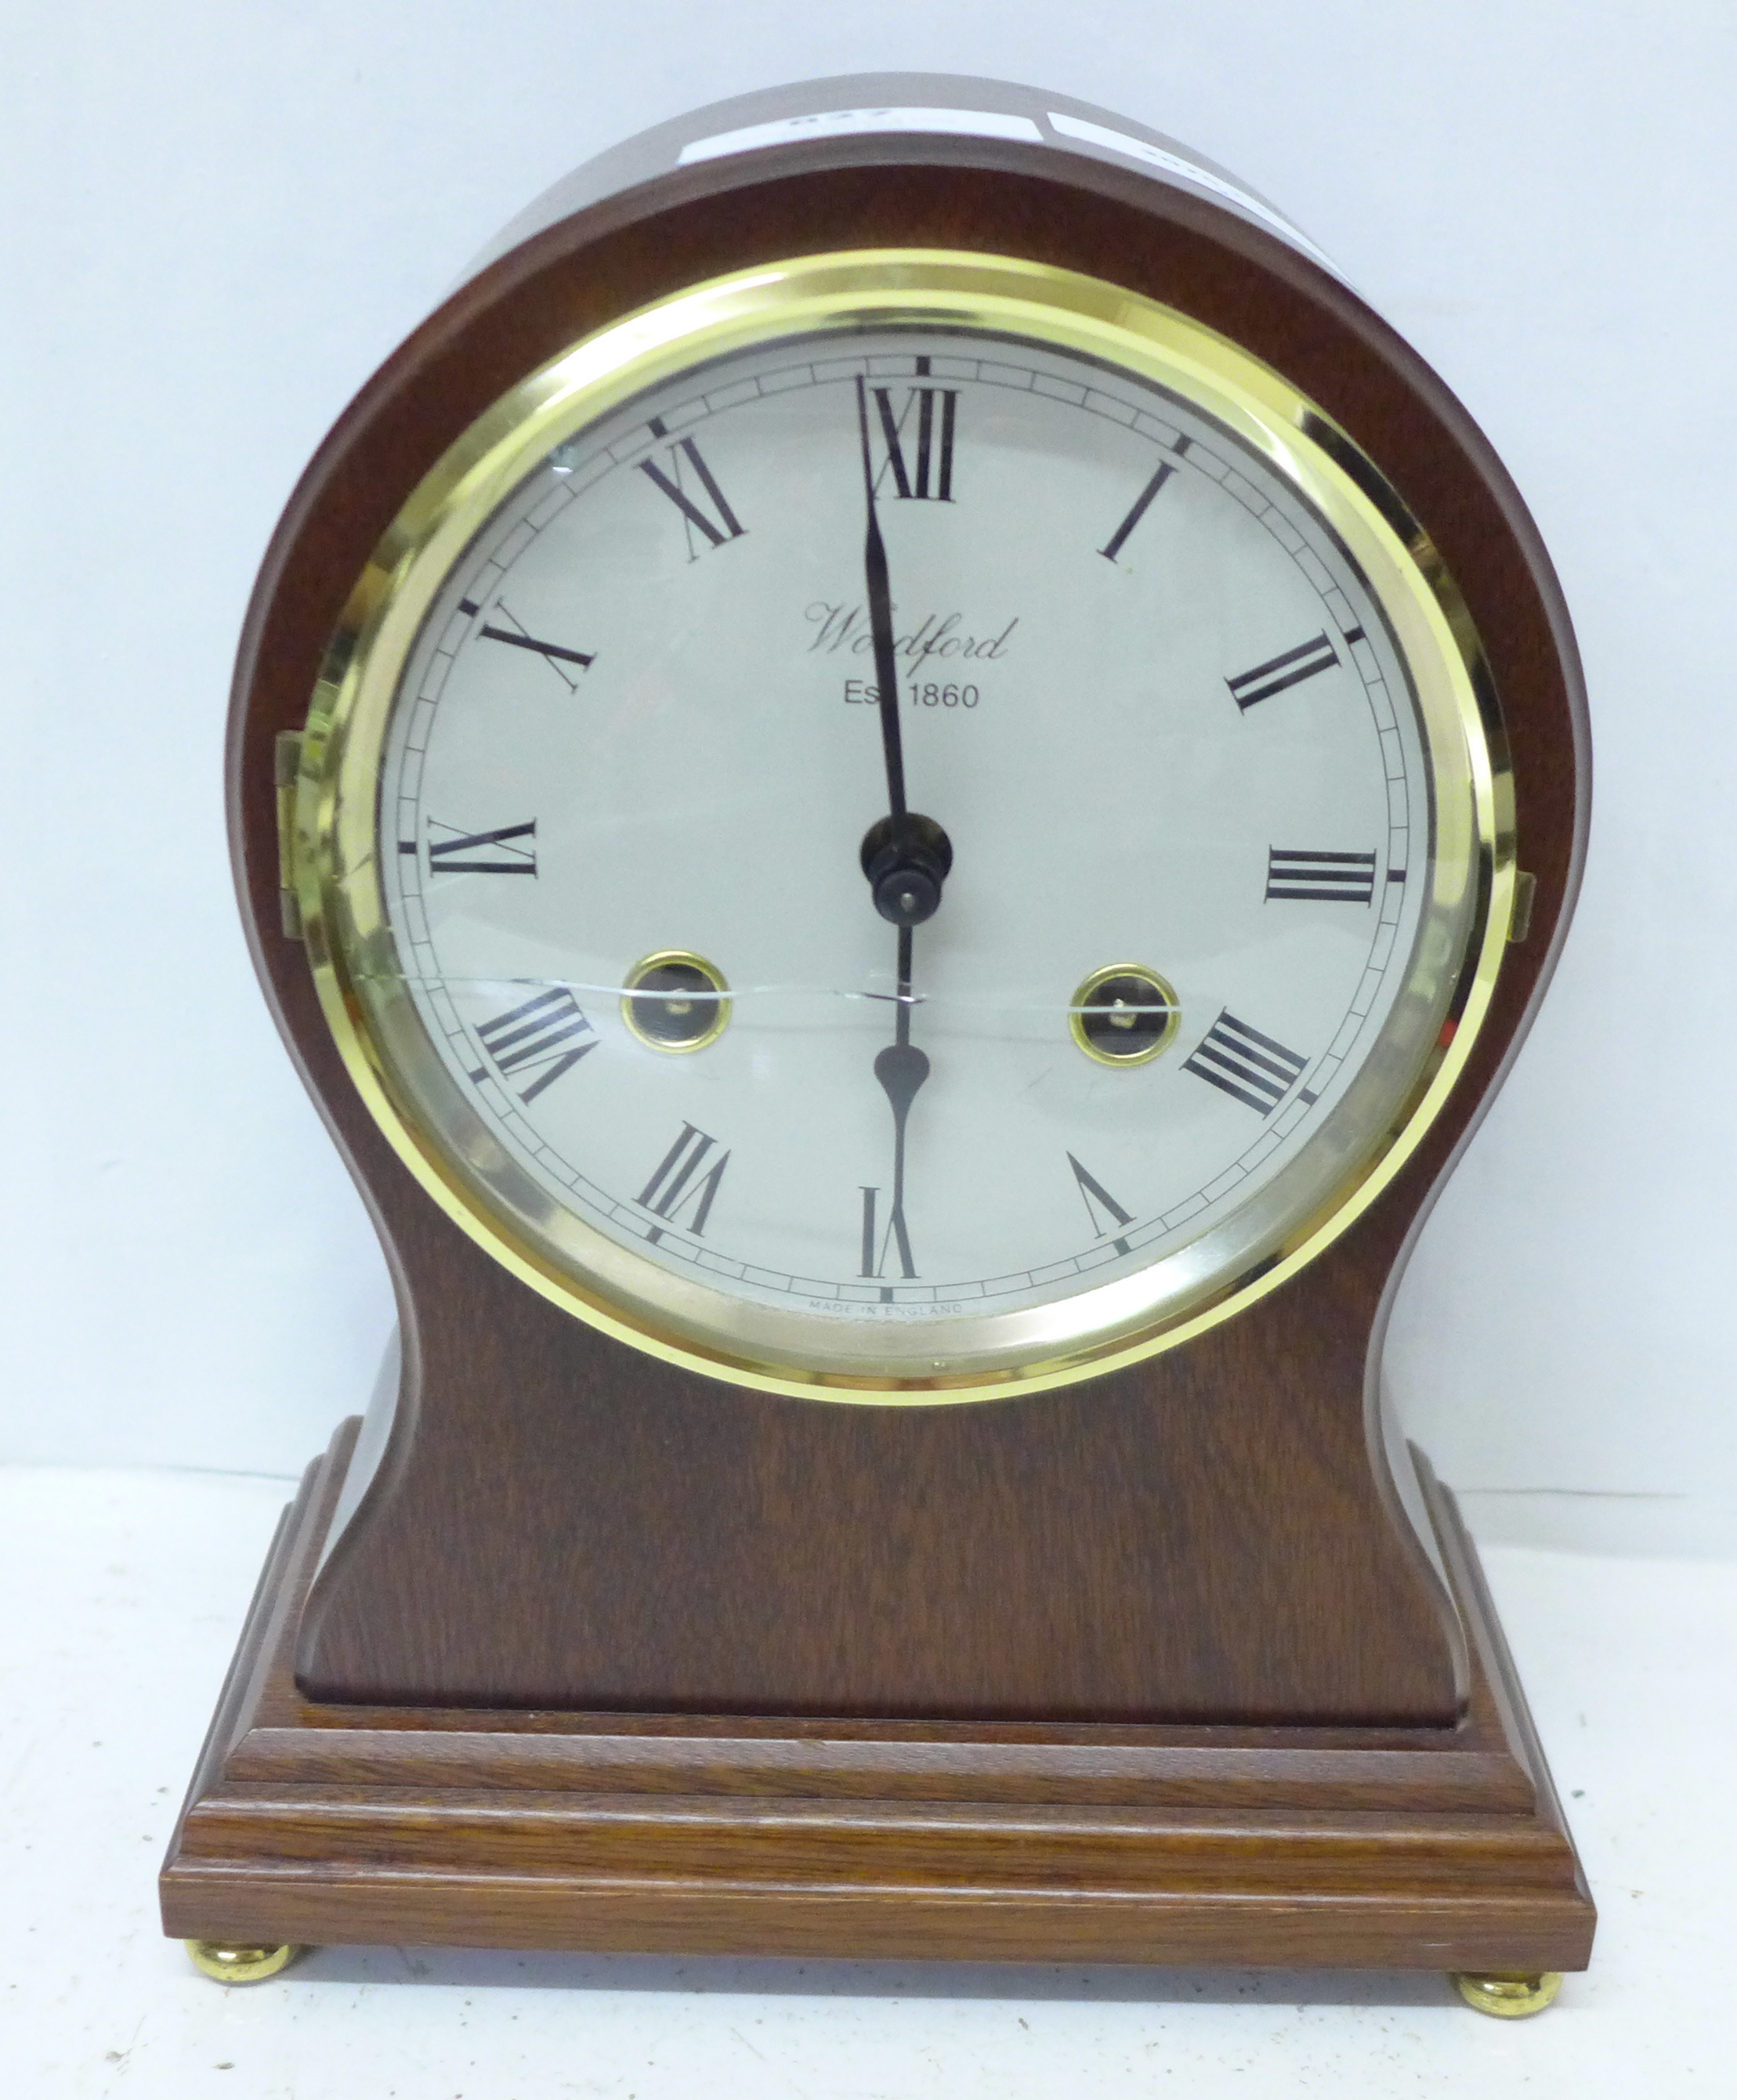 A Woodford floating balance clock with striking Franz Hermle movement, glass a/f